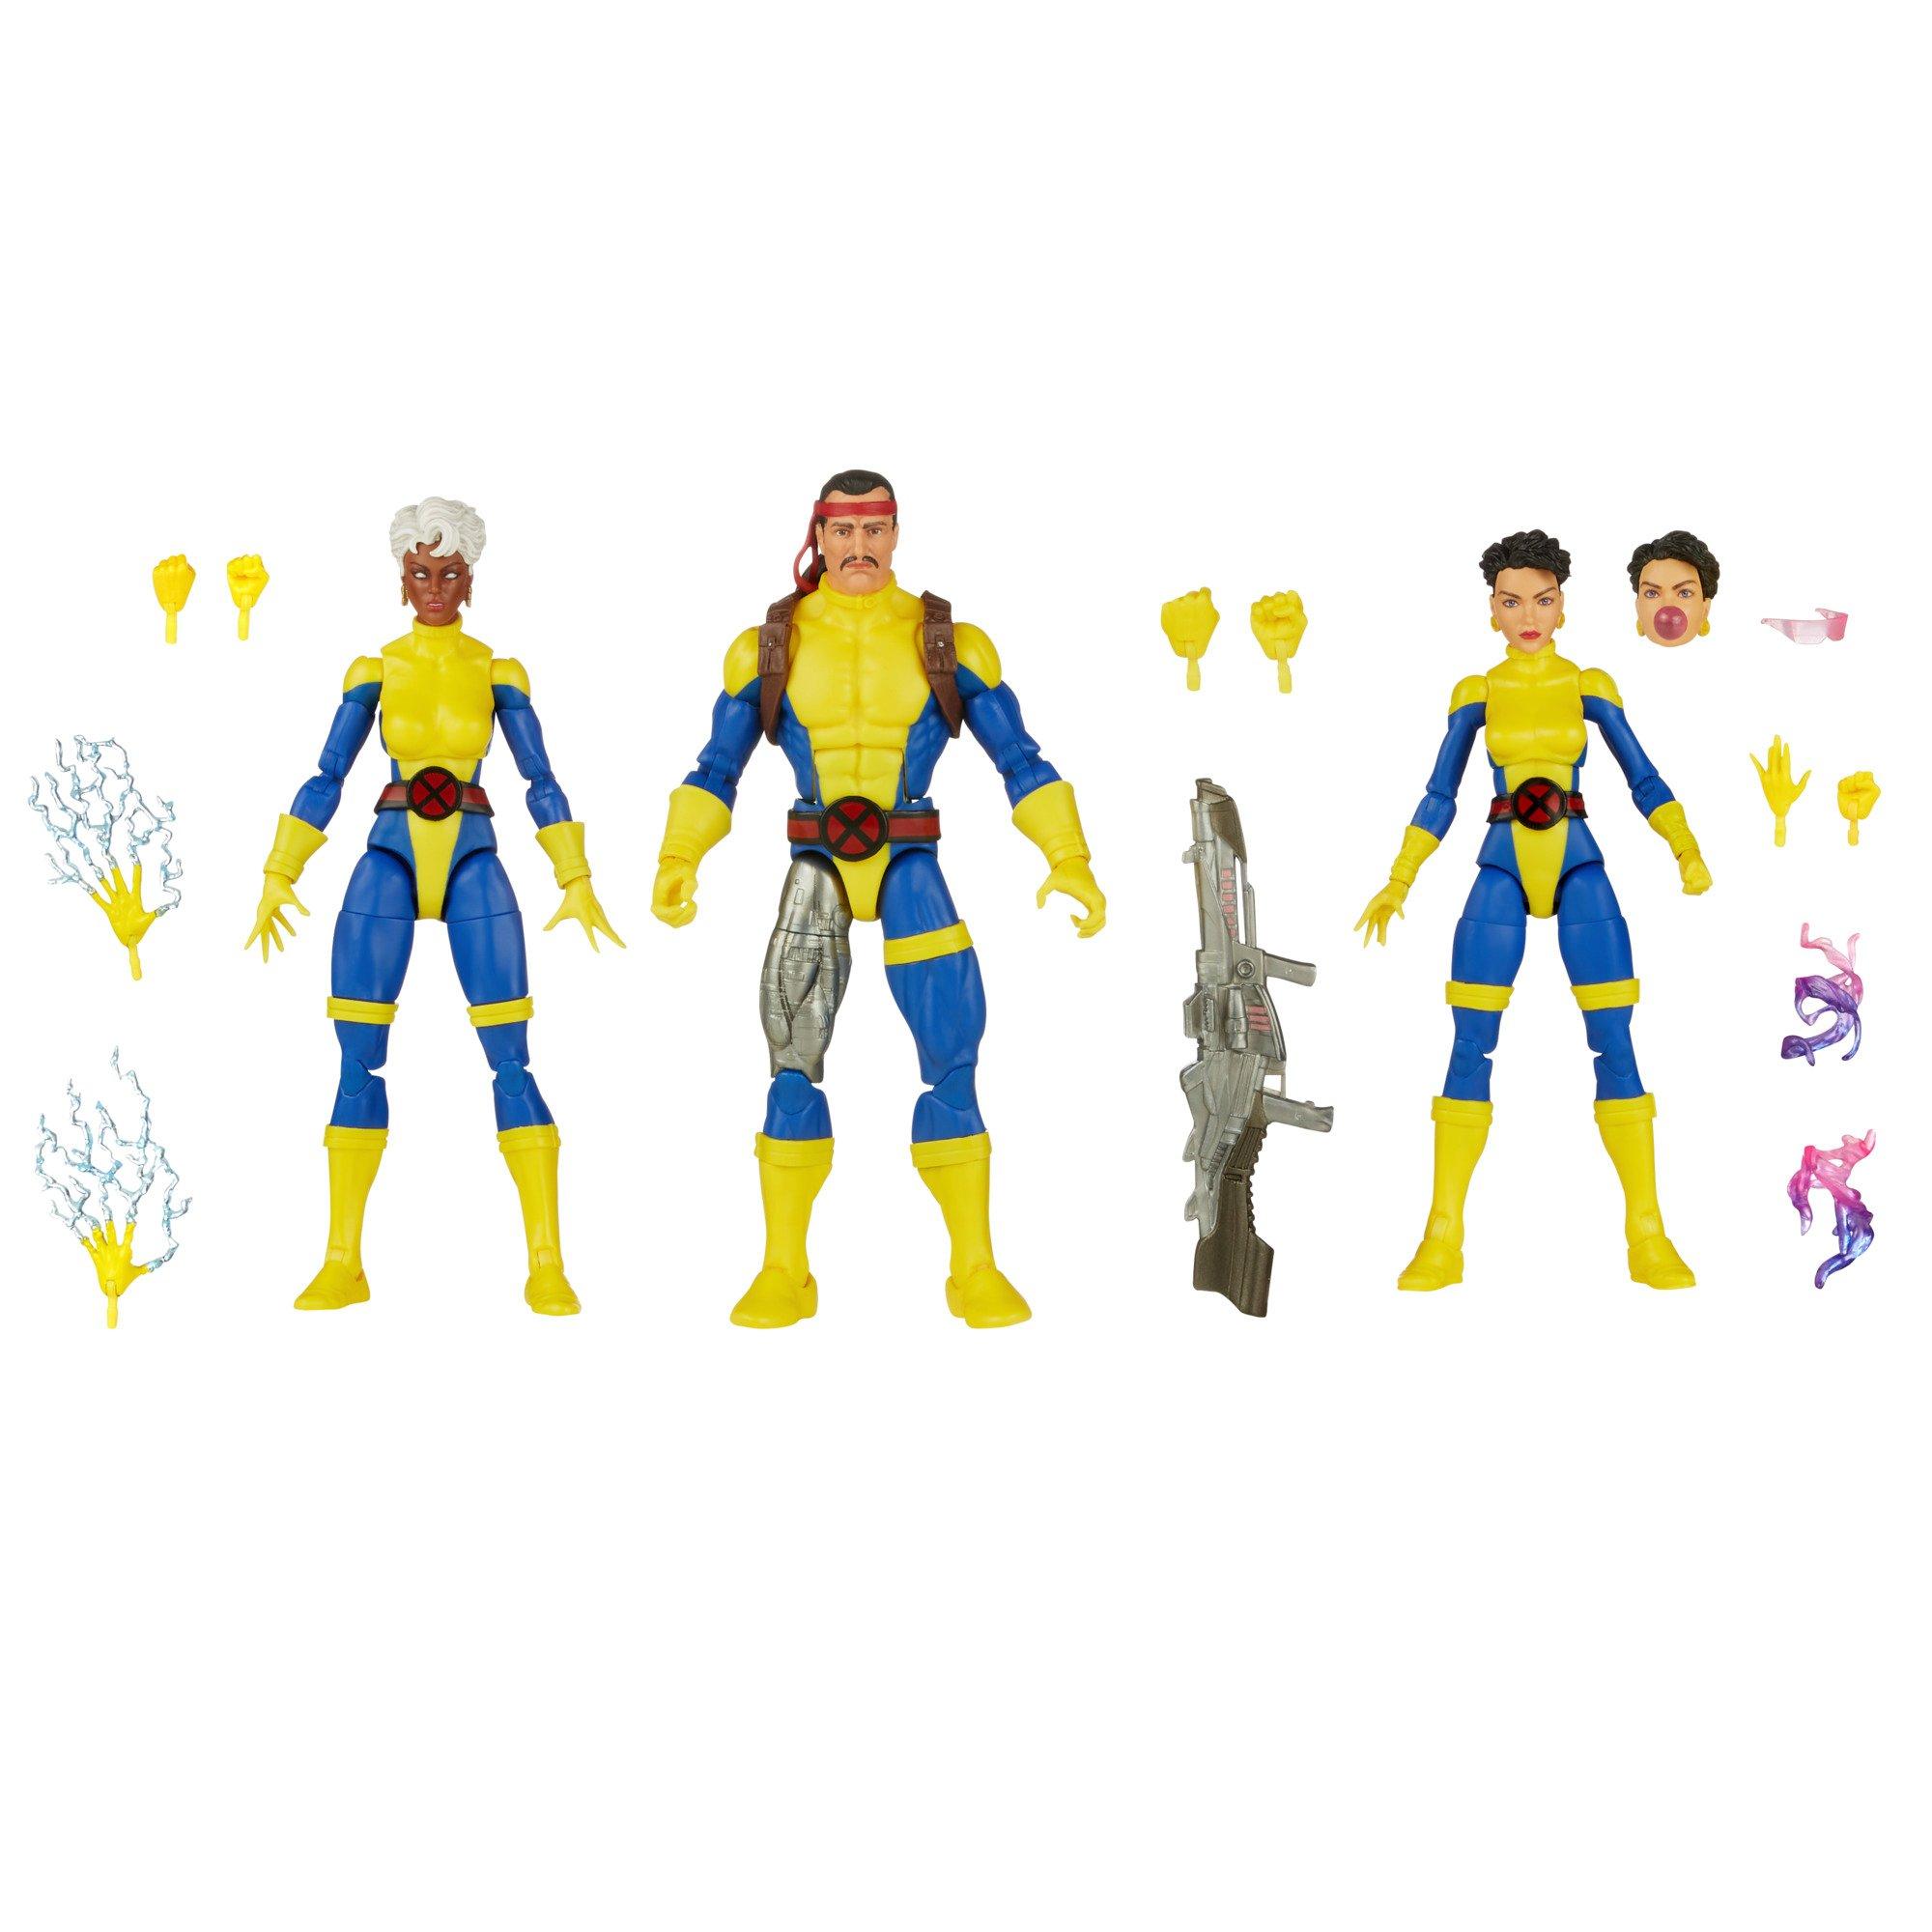 New Hasbro 6 Starting Lineup Preview Images Showing The Figure Display Base